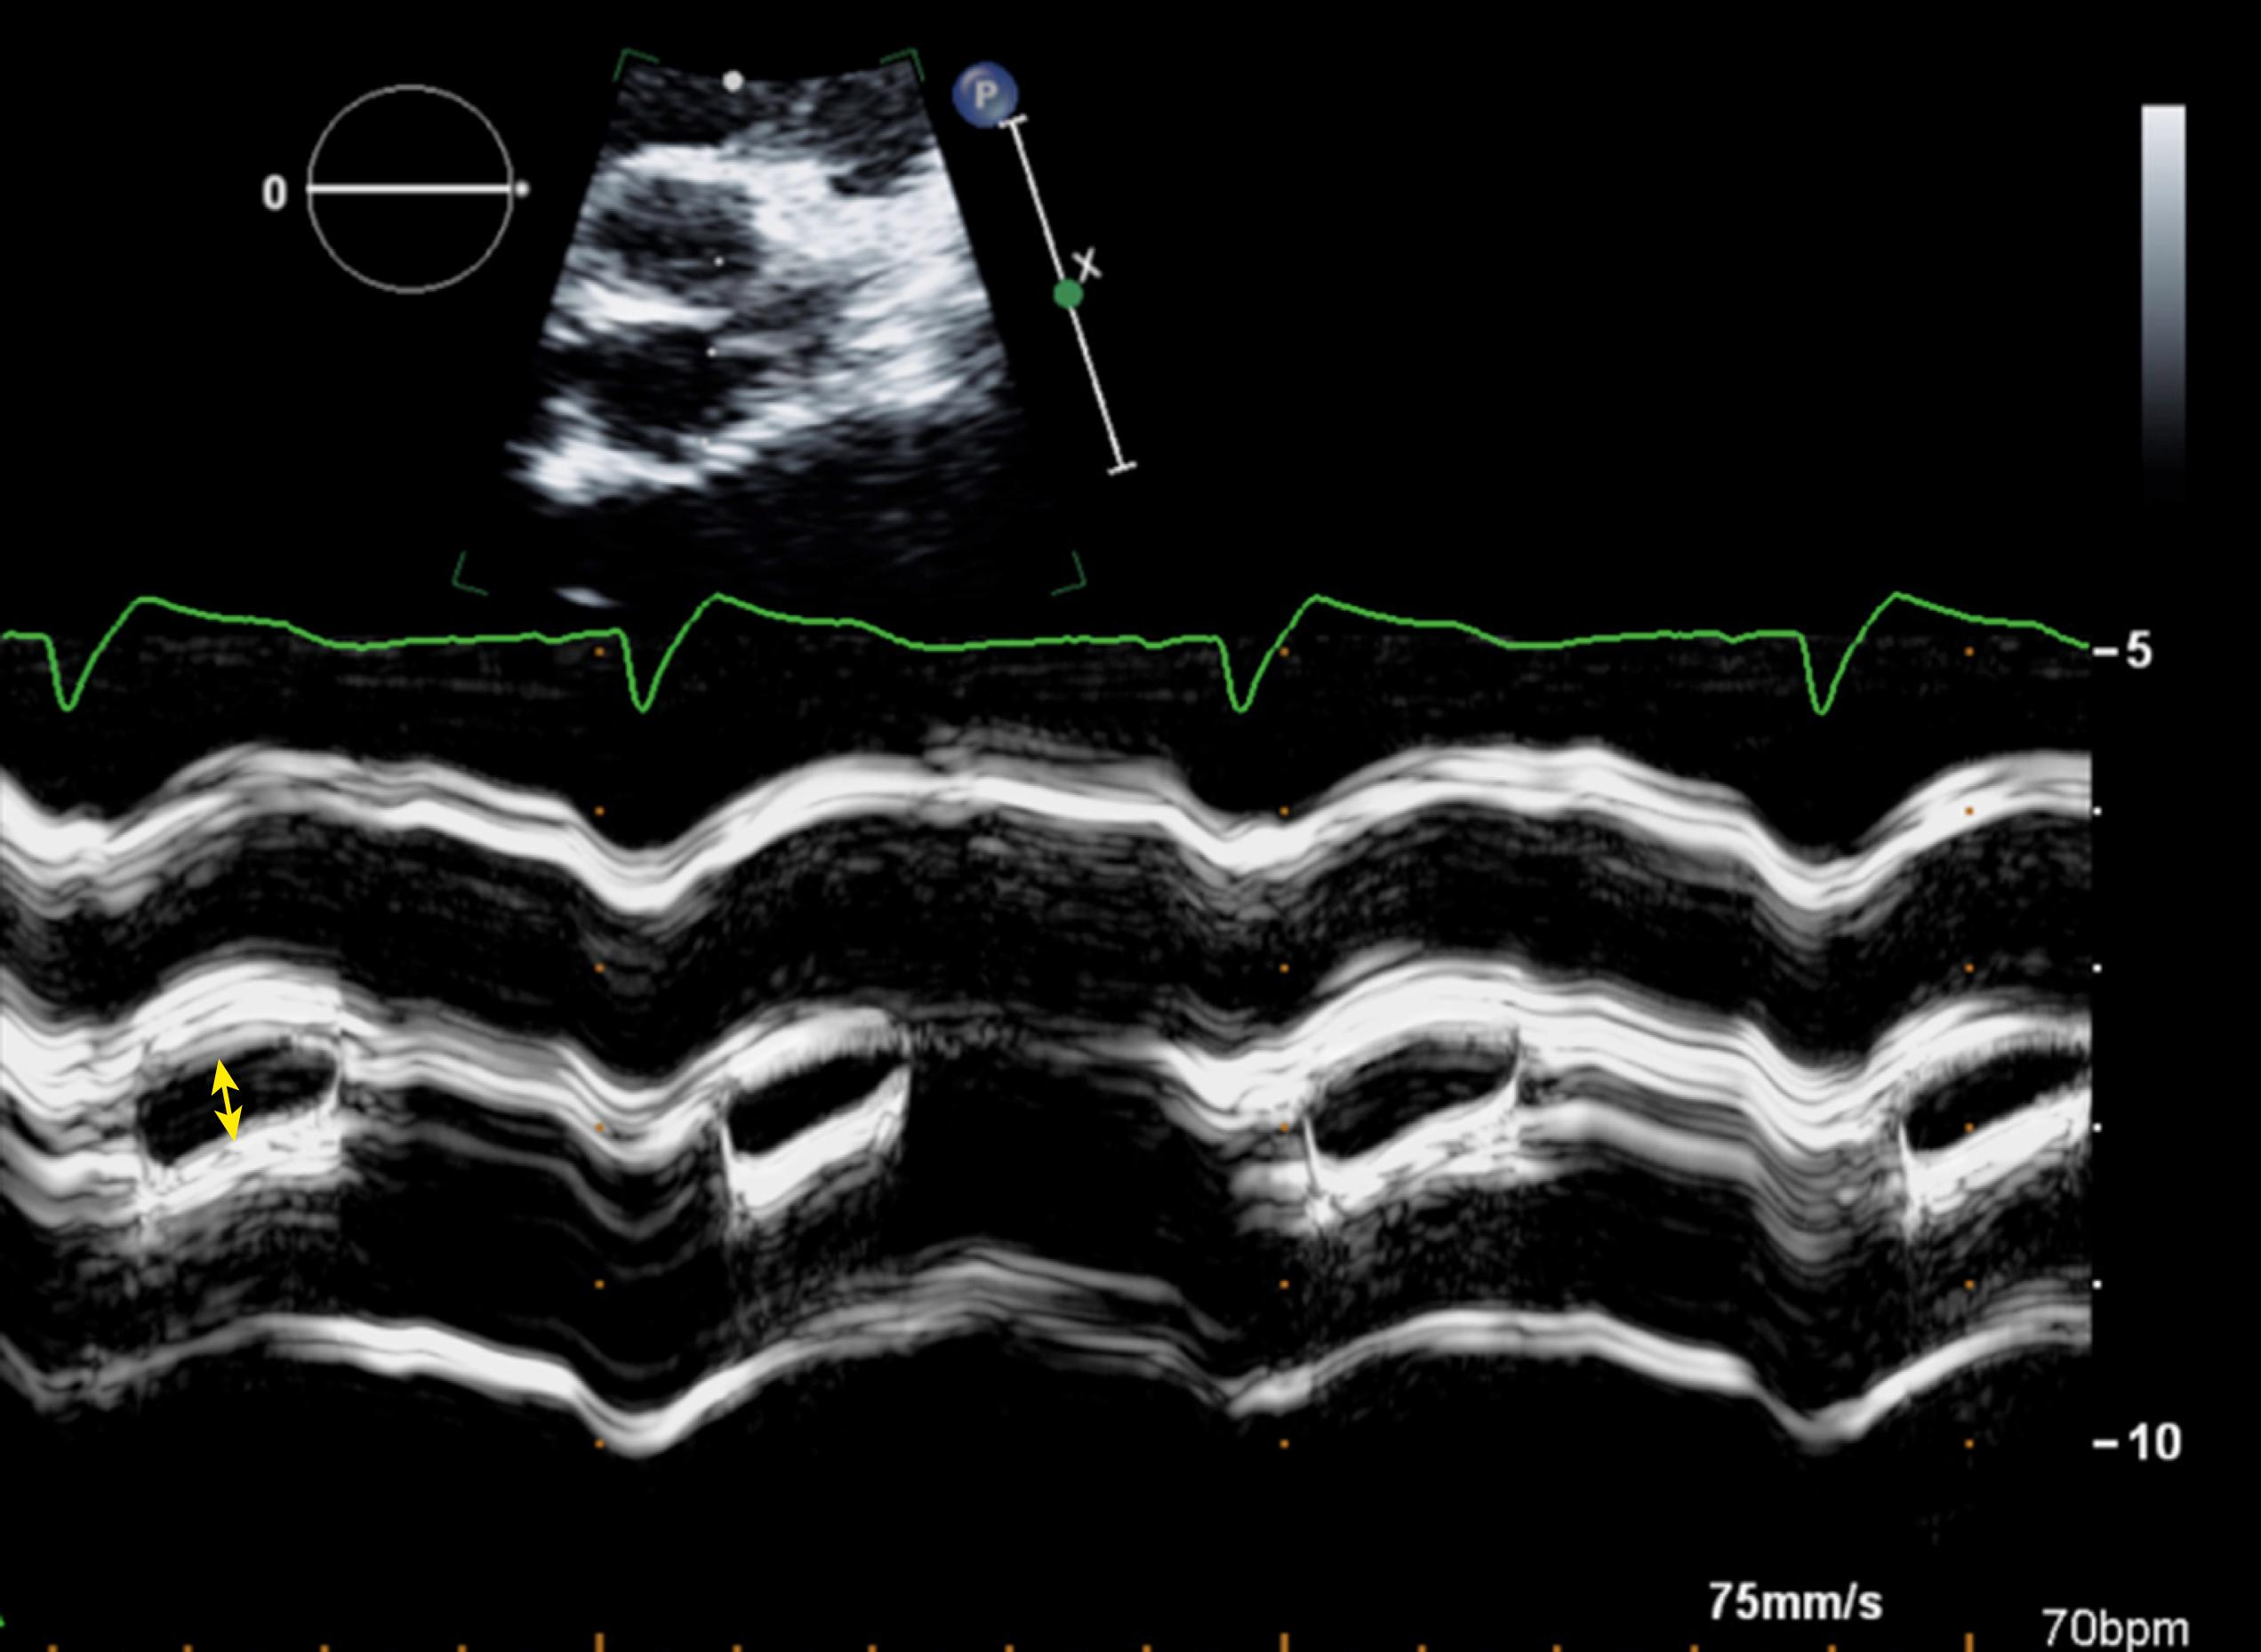 Figure 79.4, M-mode echocardiogram from a patient with moderate aortic stenosis. The maximal opening between the anterior (right coronary cusp) leaflet and a posterior leaflet (noncoronary cusp) (yellow arrow) is less than 5 mm.